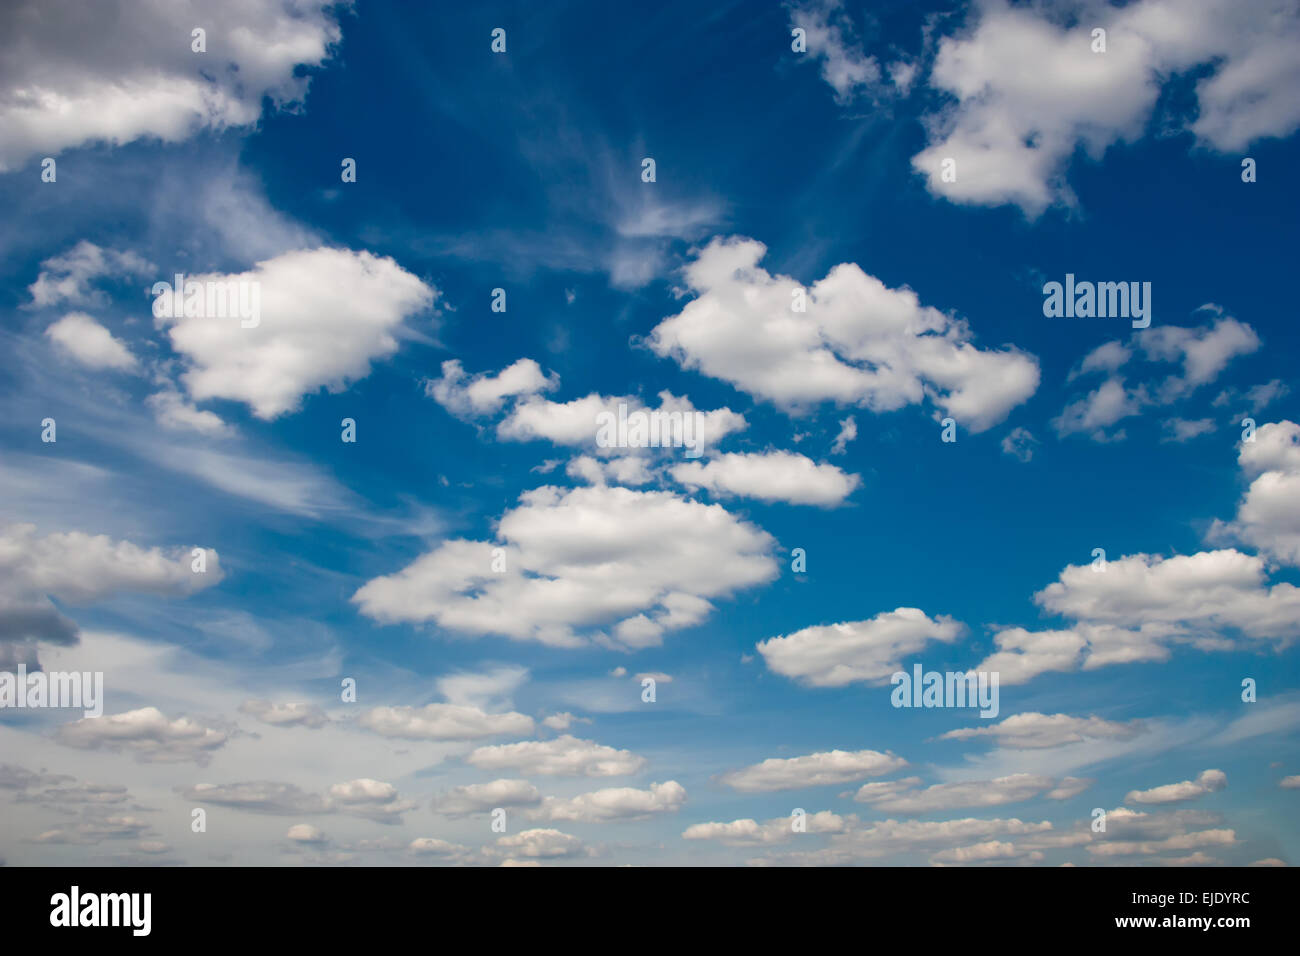 Blue sky with white clouds. Natural  background image Stock Photo